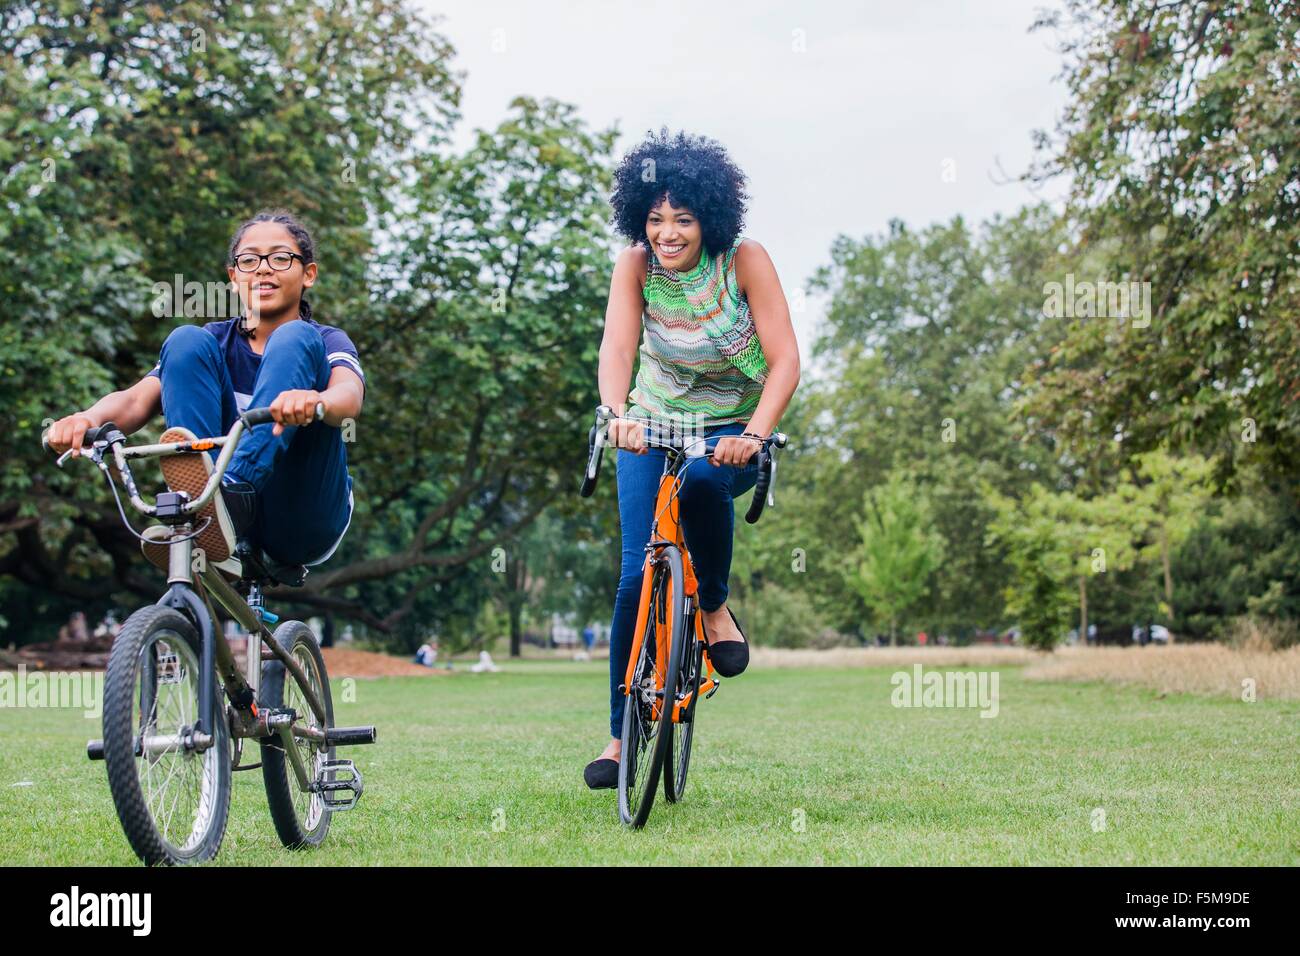 Front view of mother and son riding on bicycles smiling Stock Photo